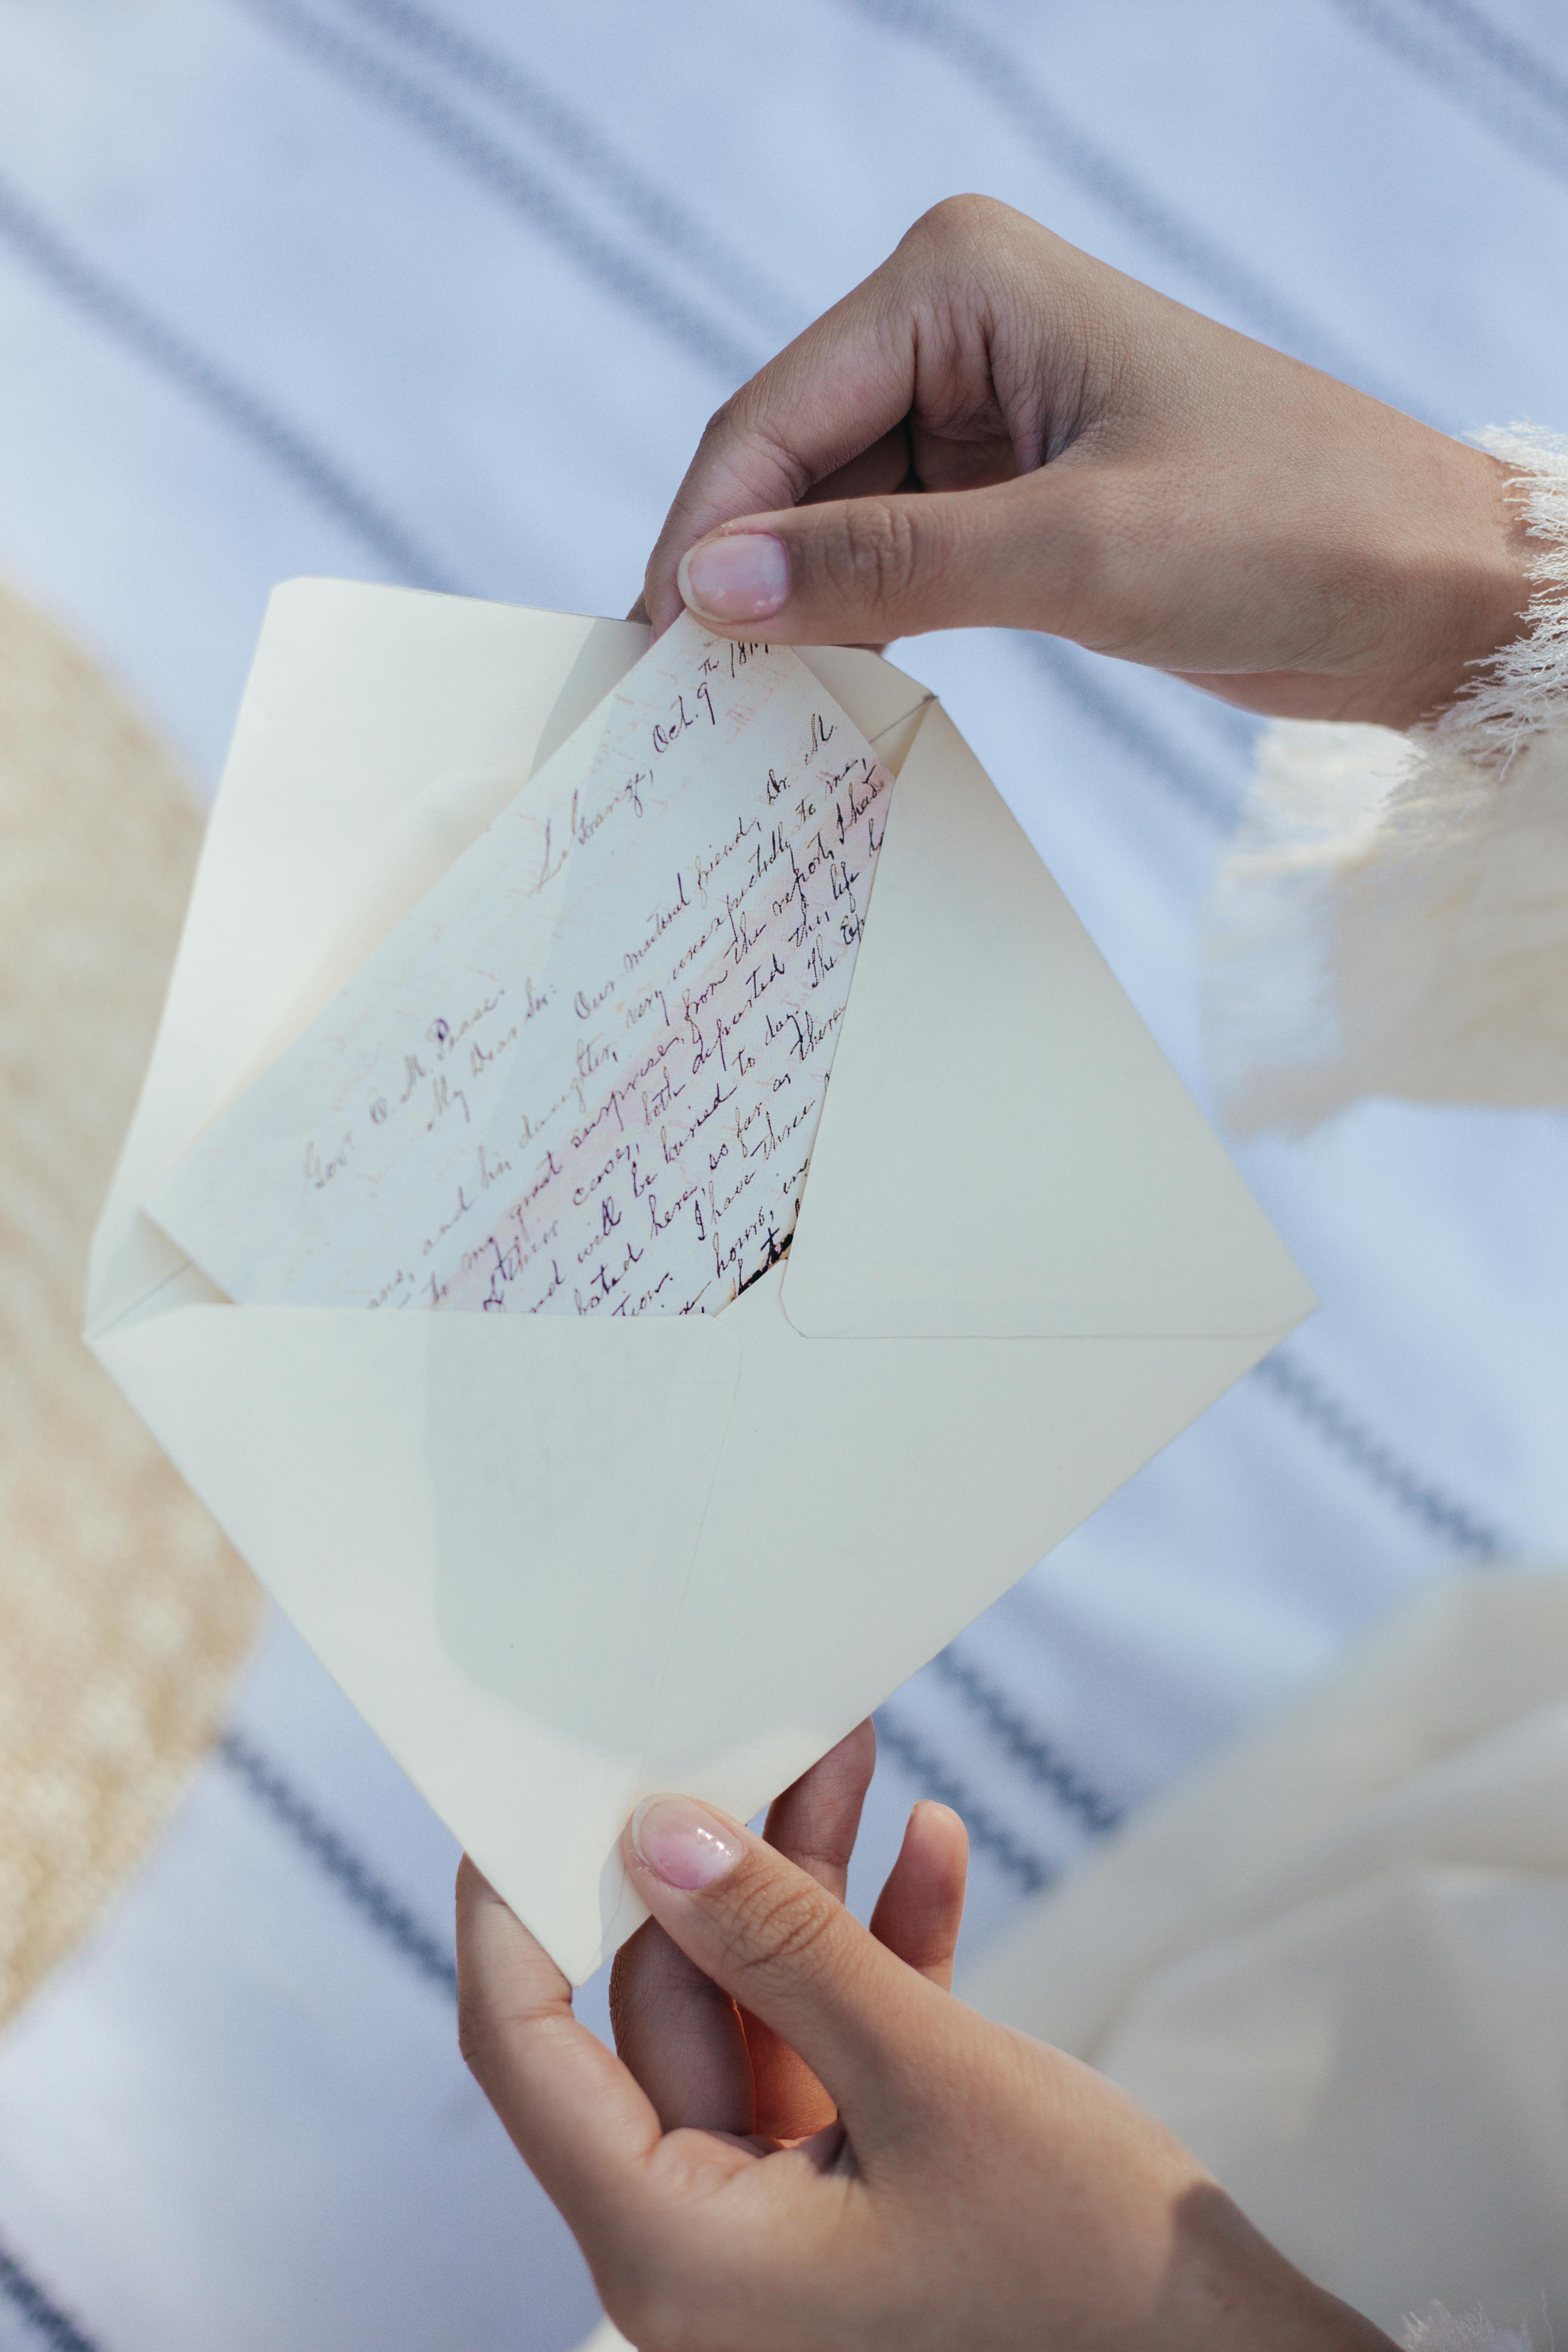 A woman taking out a letter from an envelope | Source: Pexels